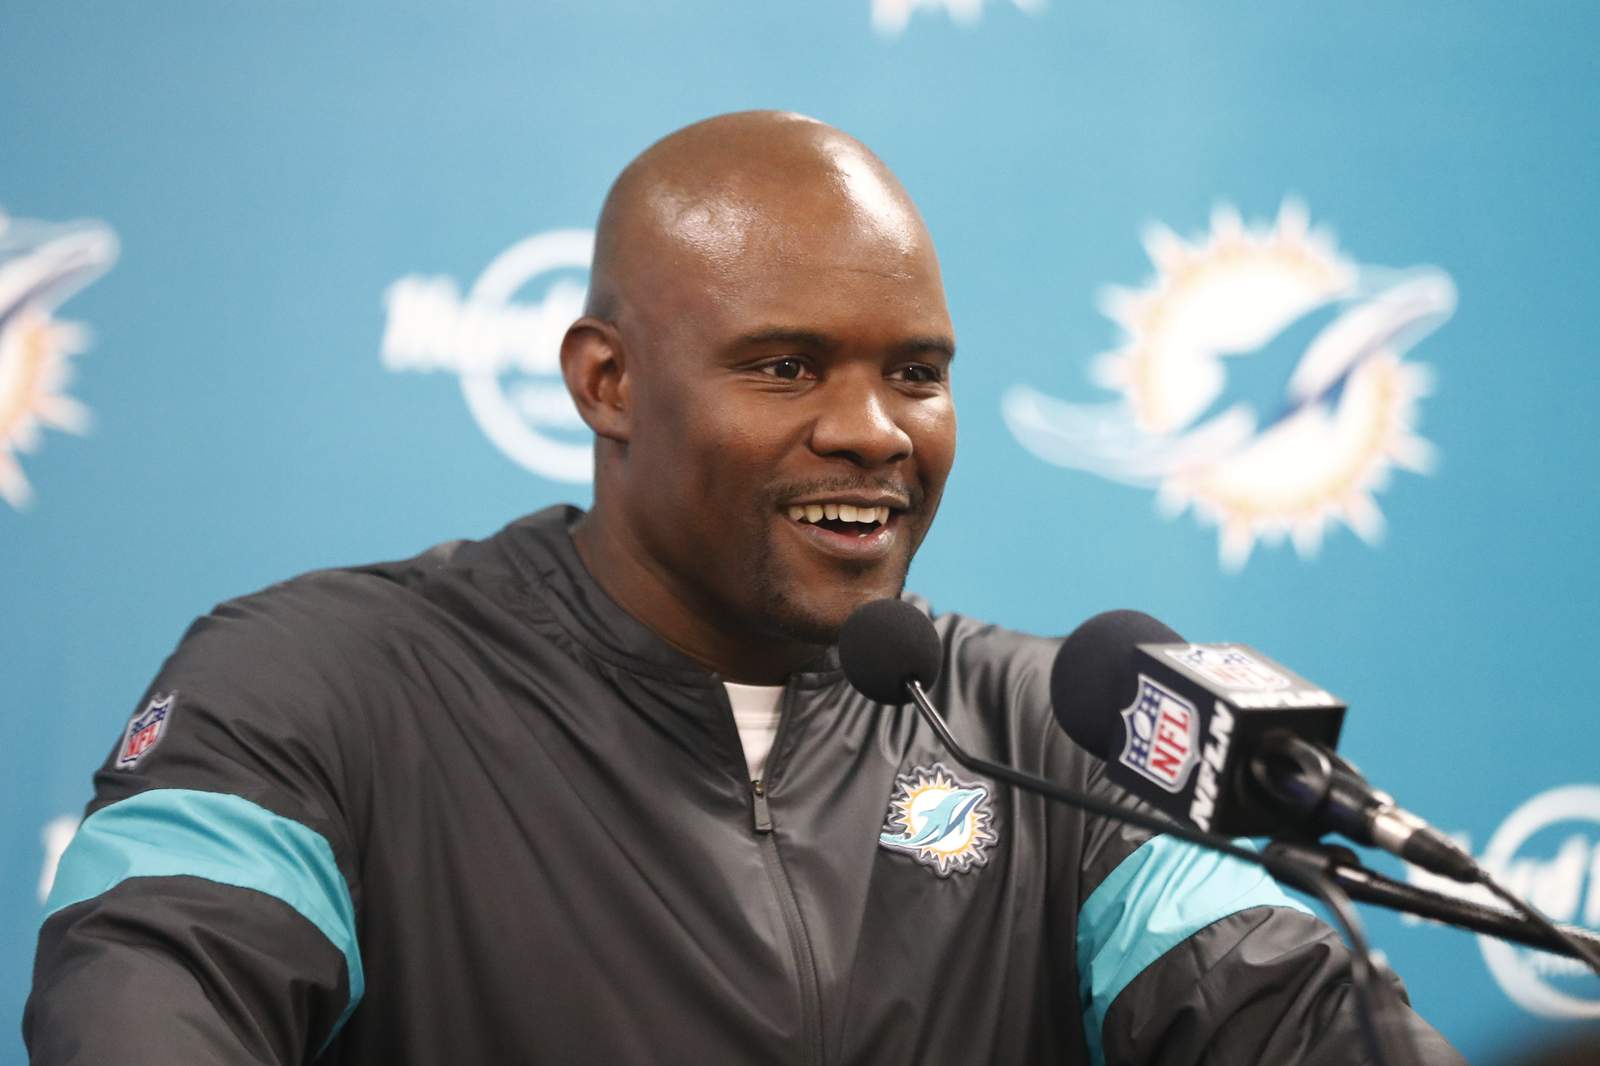 Coach: Message in Dolphins' video is 'we can all do better'